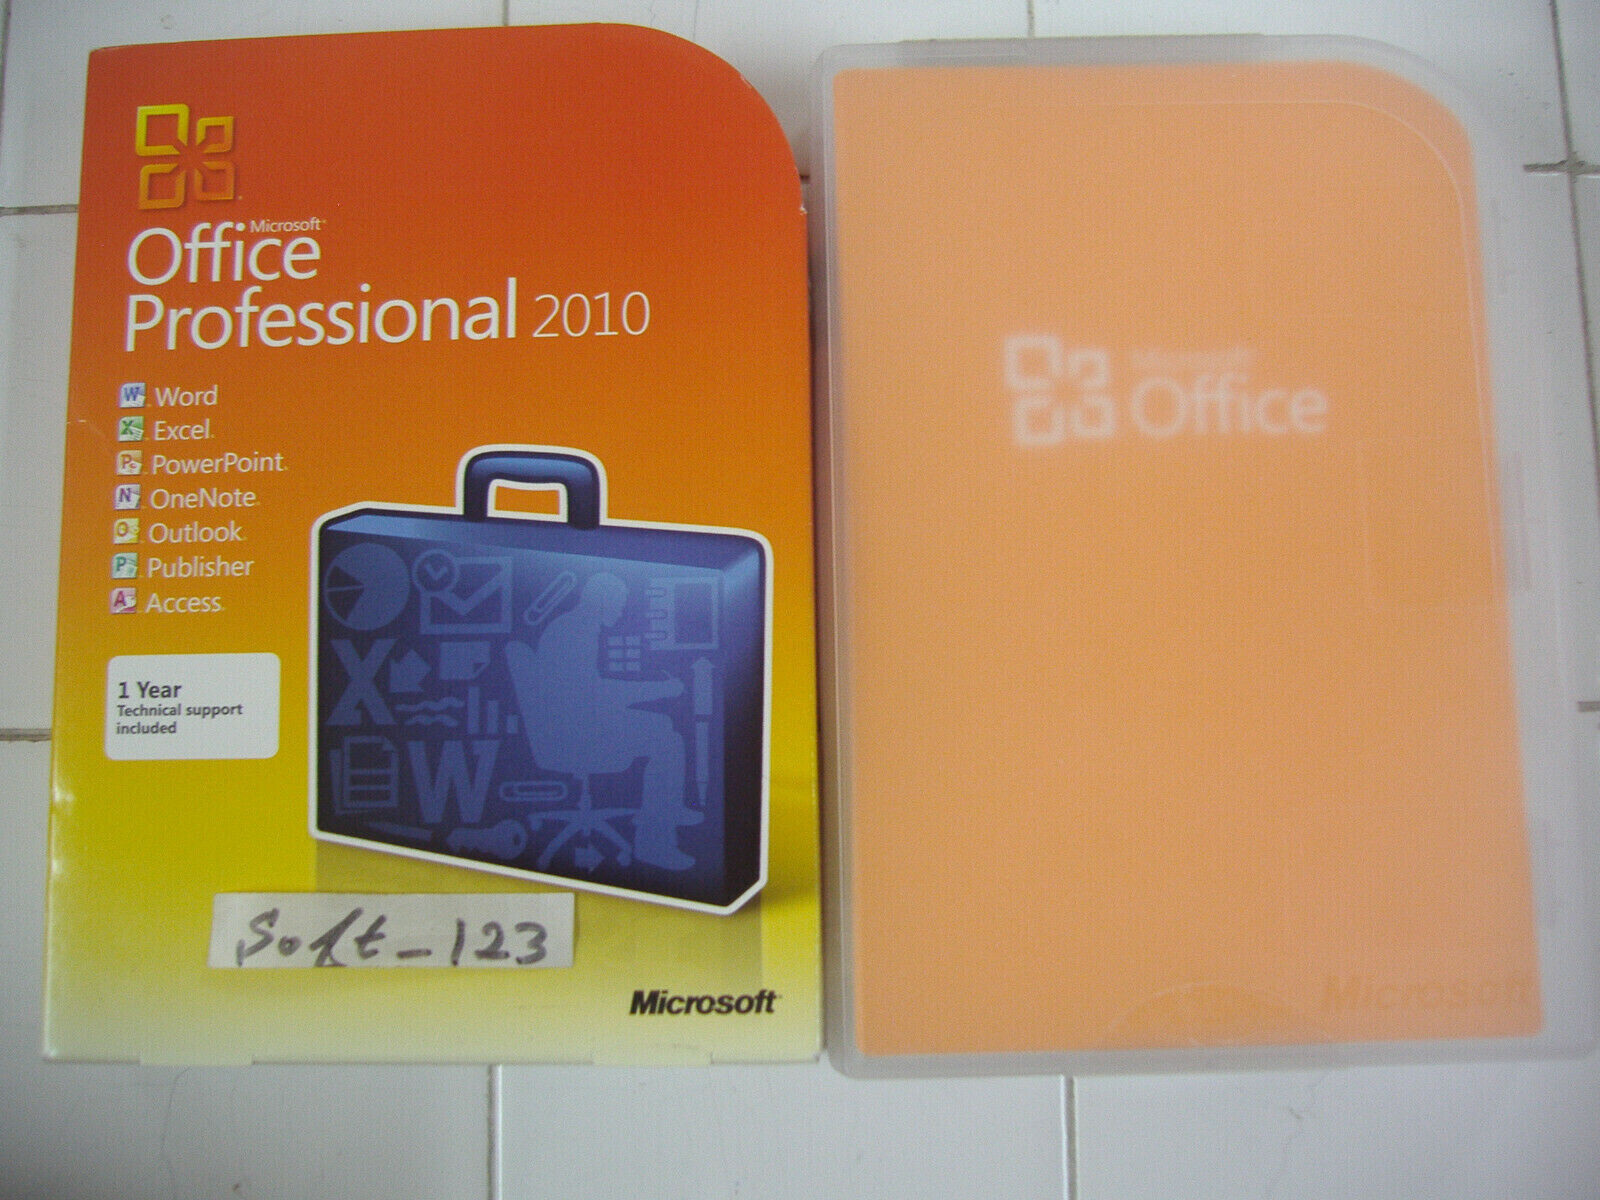 Microsoft Office 2010 Professional For 2 PCs Full English Ver. =NEW SEALED BOX=